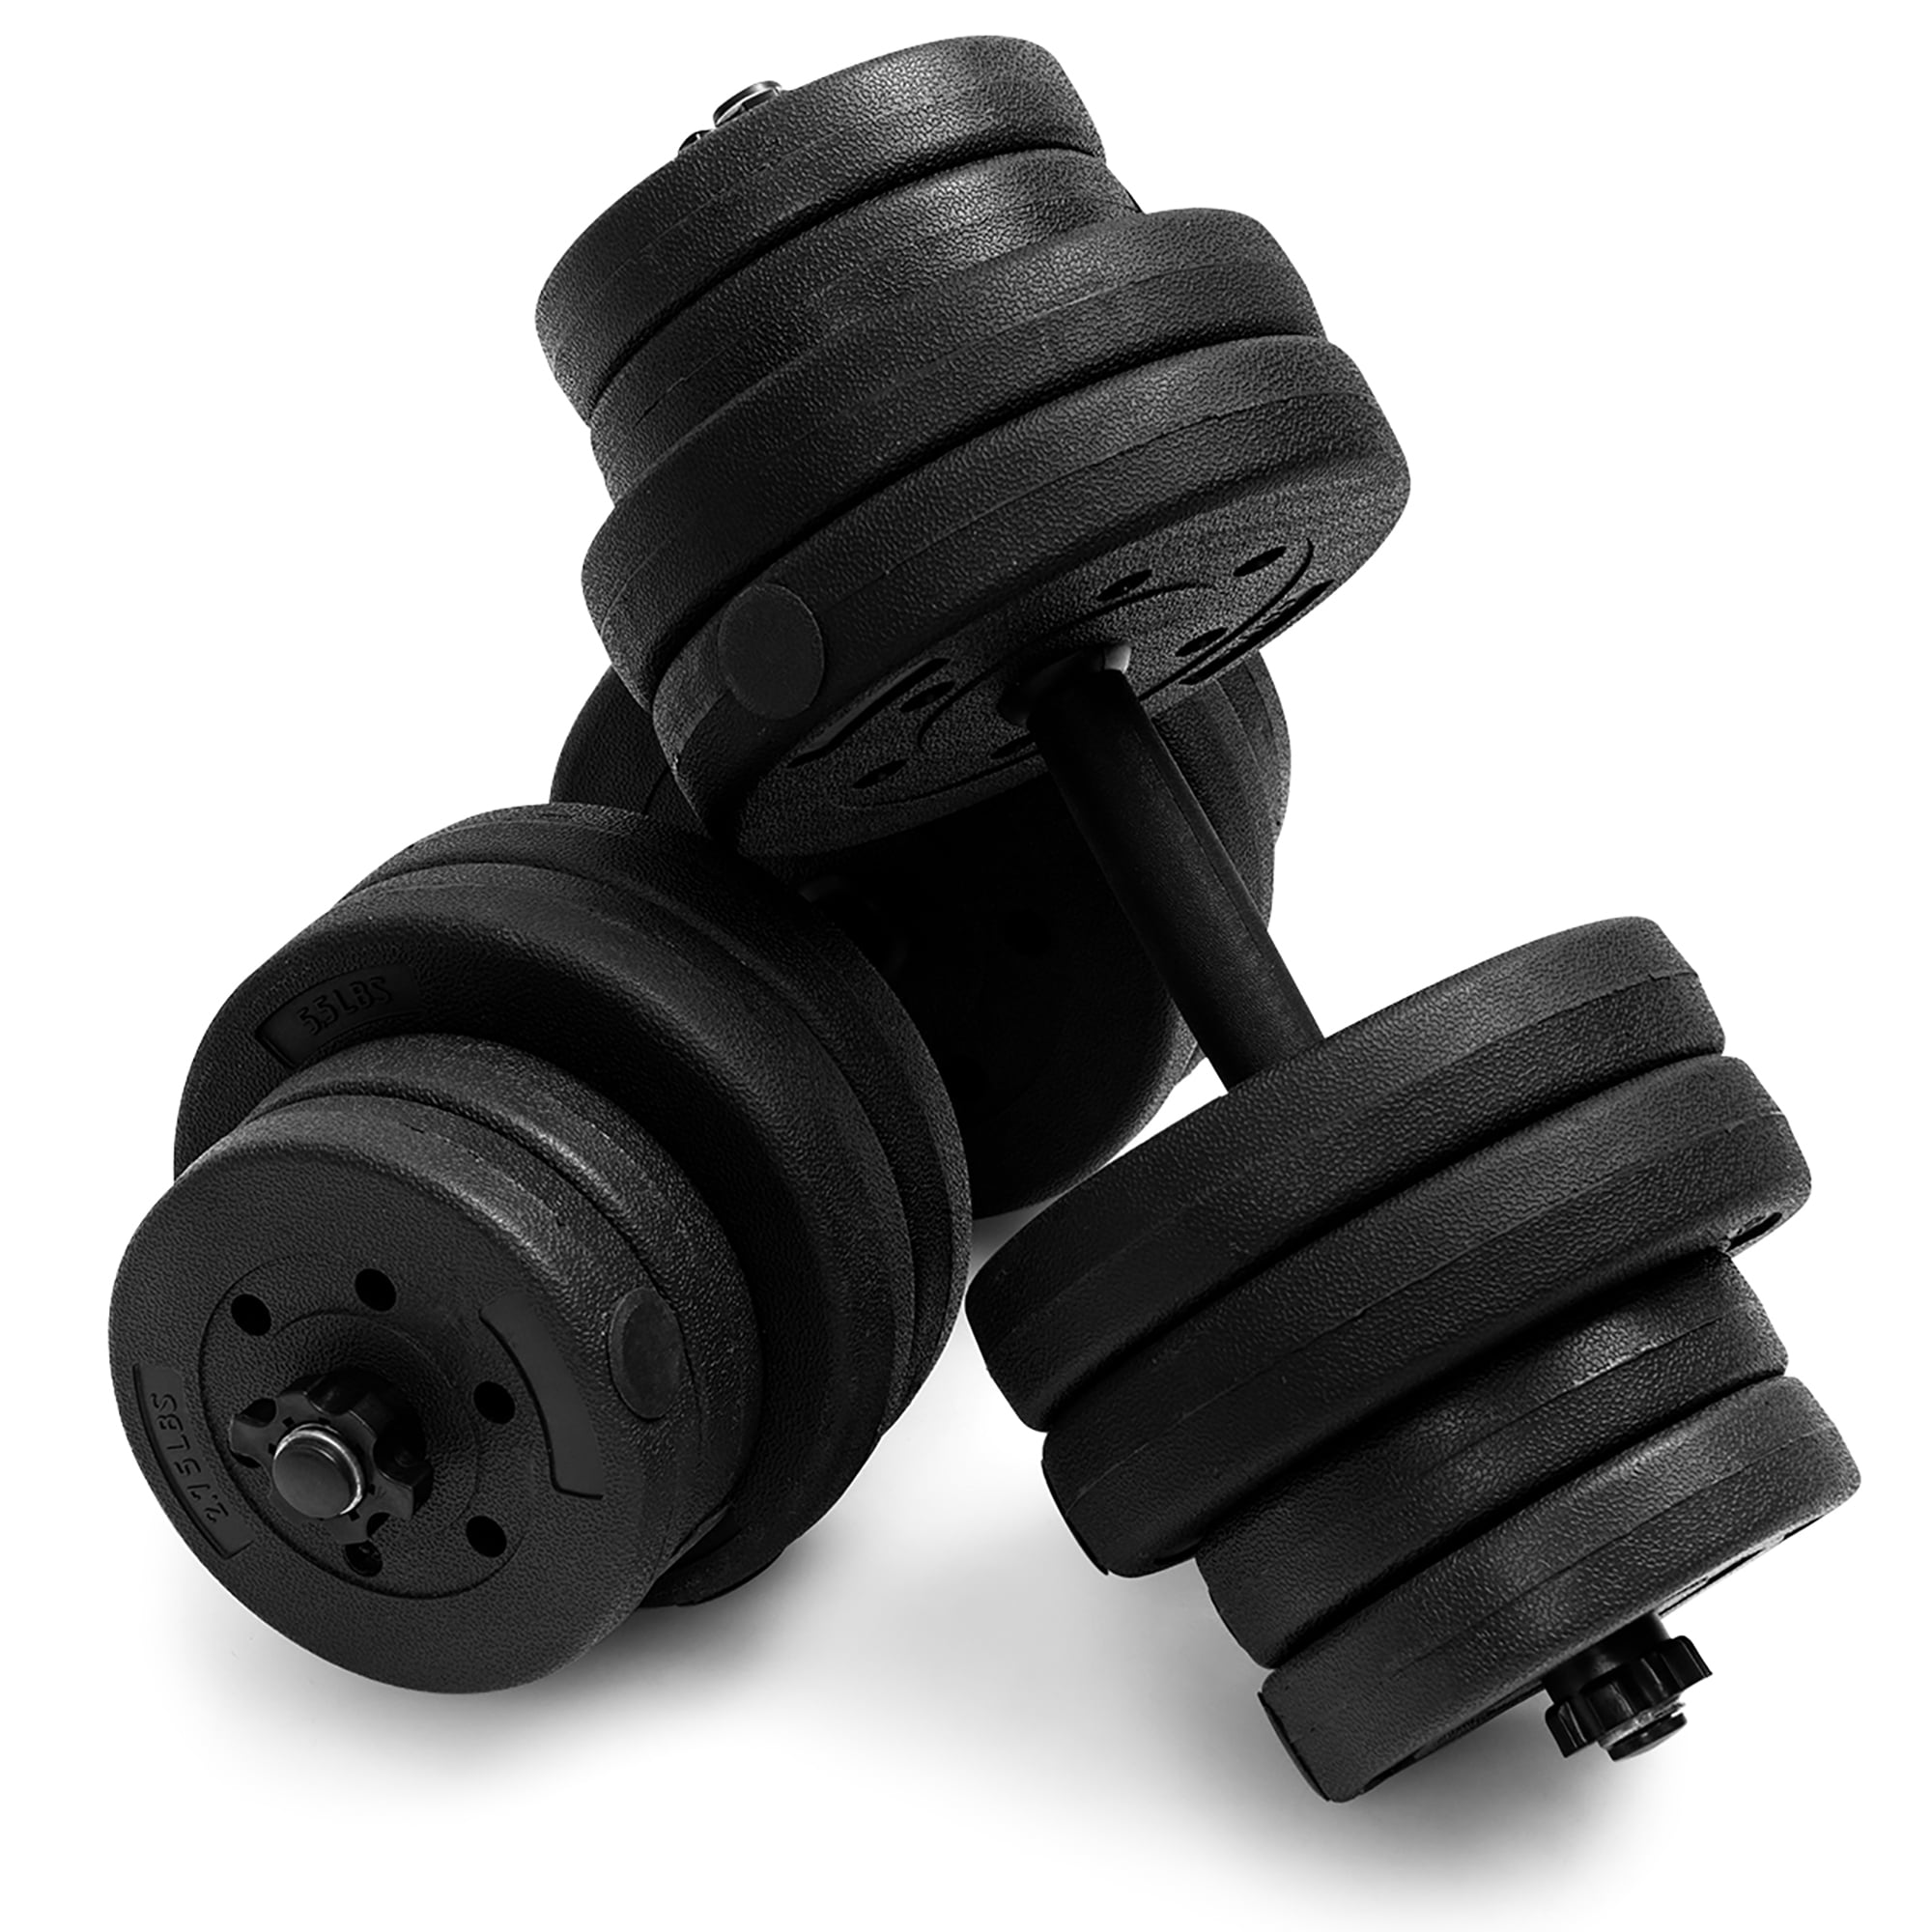 Totall 66 LB Weight Dumbbell Set Adjustable Cap Gym Barbell Plates Body Workout 